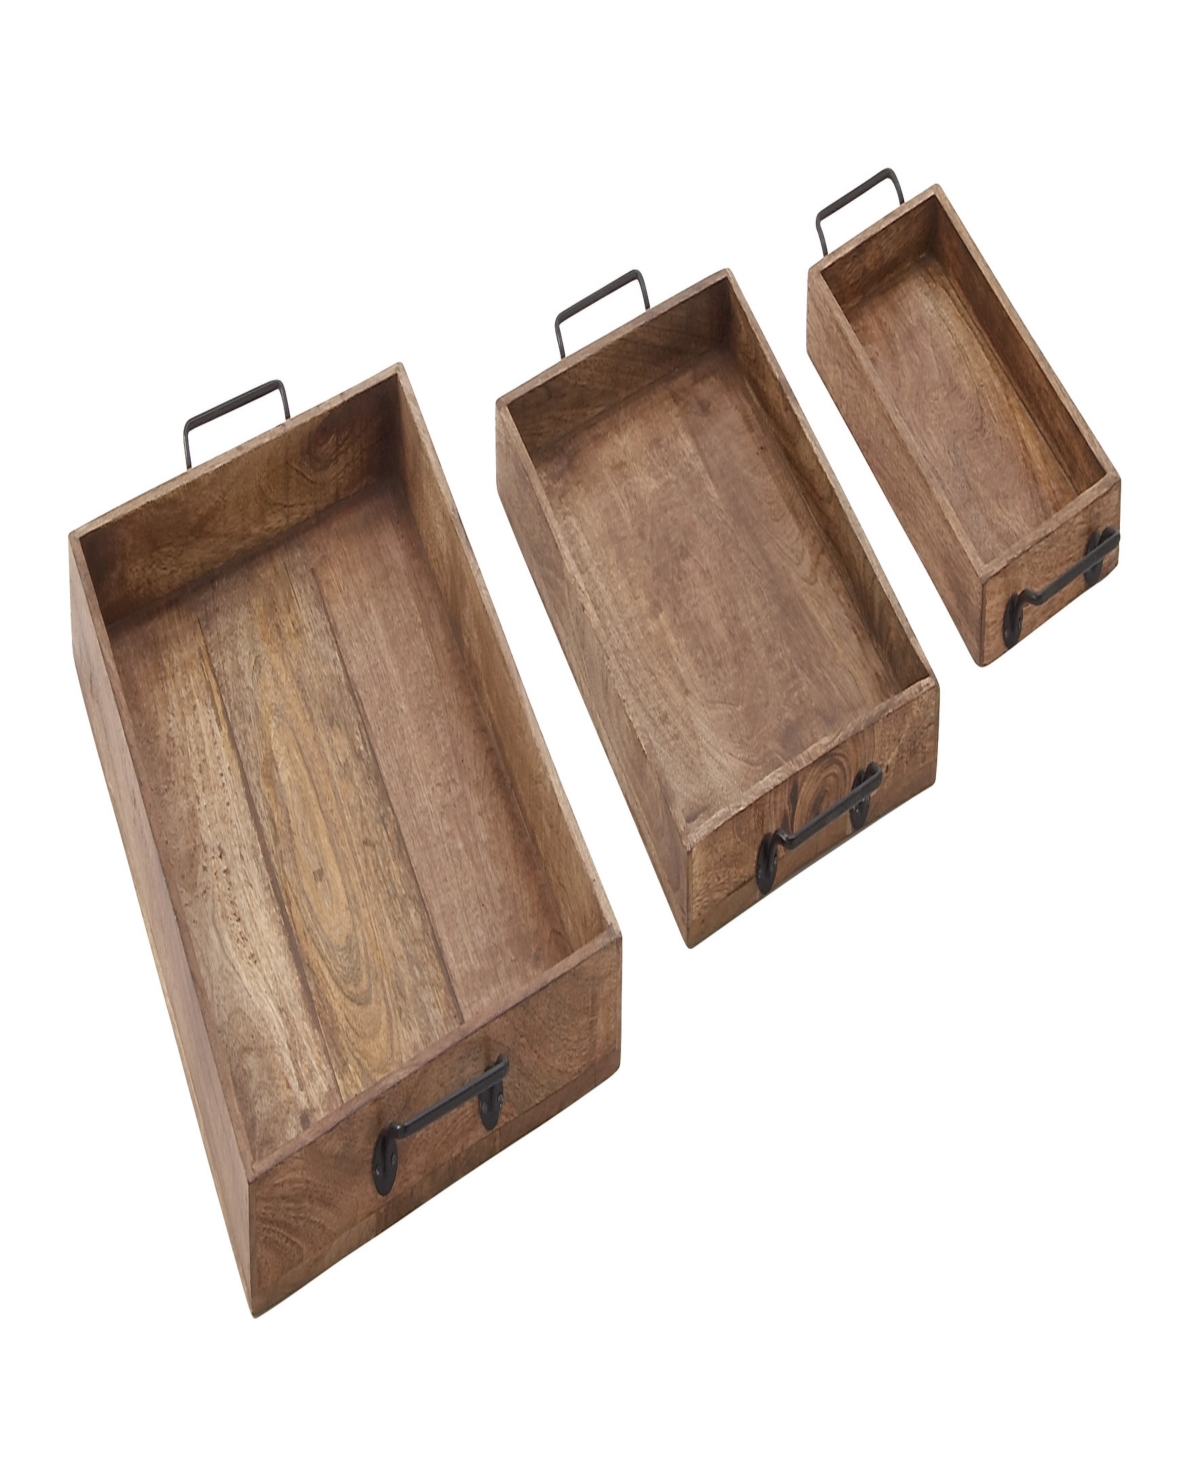 Rosemary Lane Mango Wood Tray With Slot Handles, Set Of 3, 17", 20", 24" W In Brown